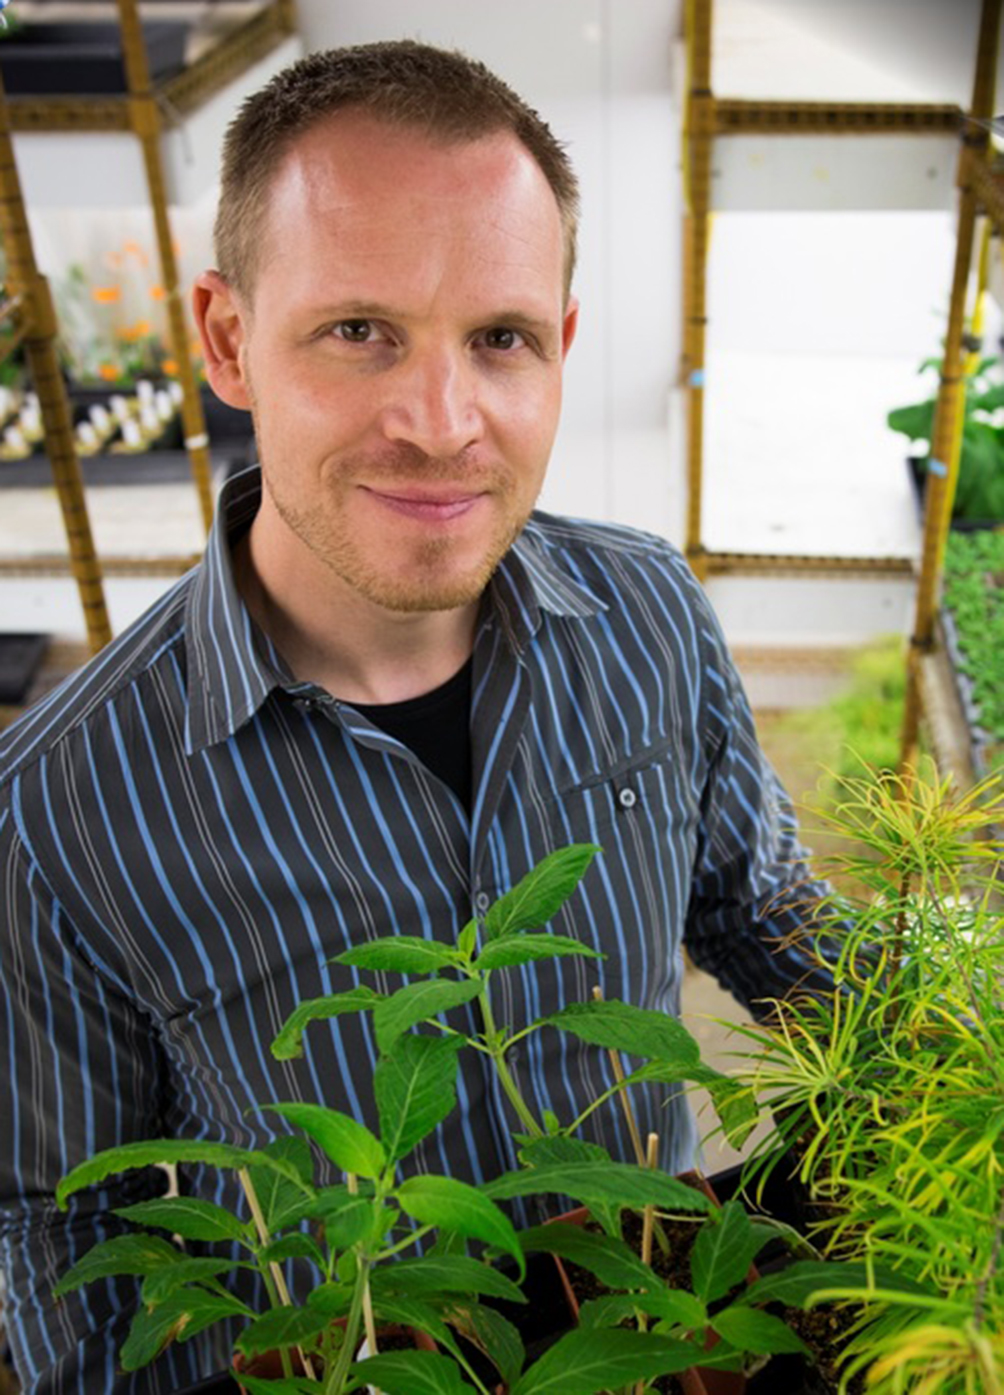 Philipp Zerbe stands with plants